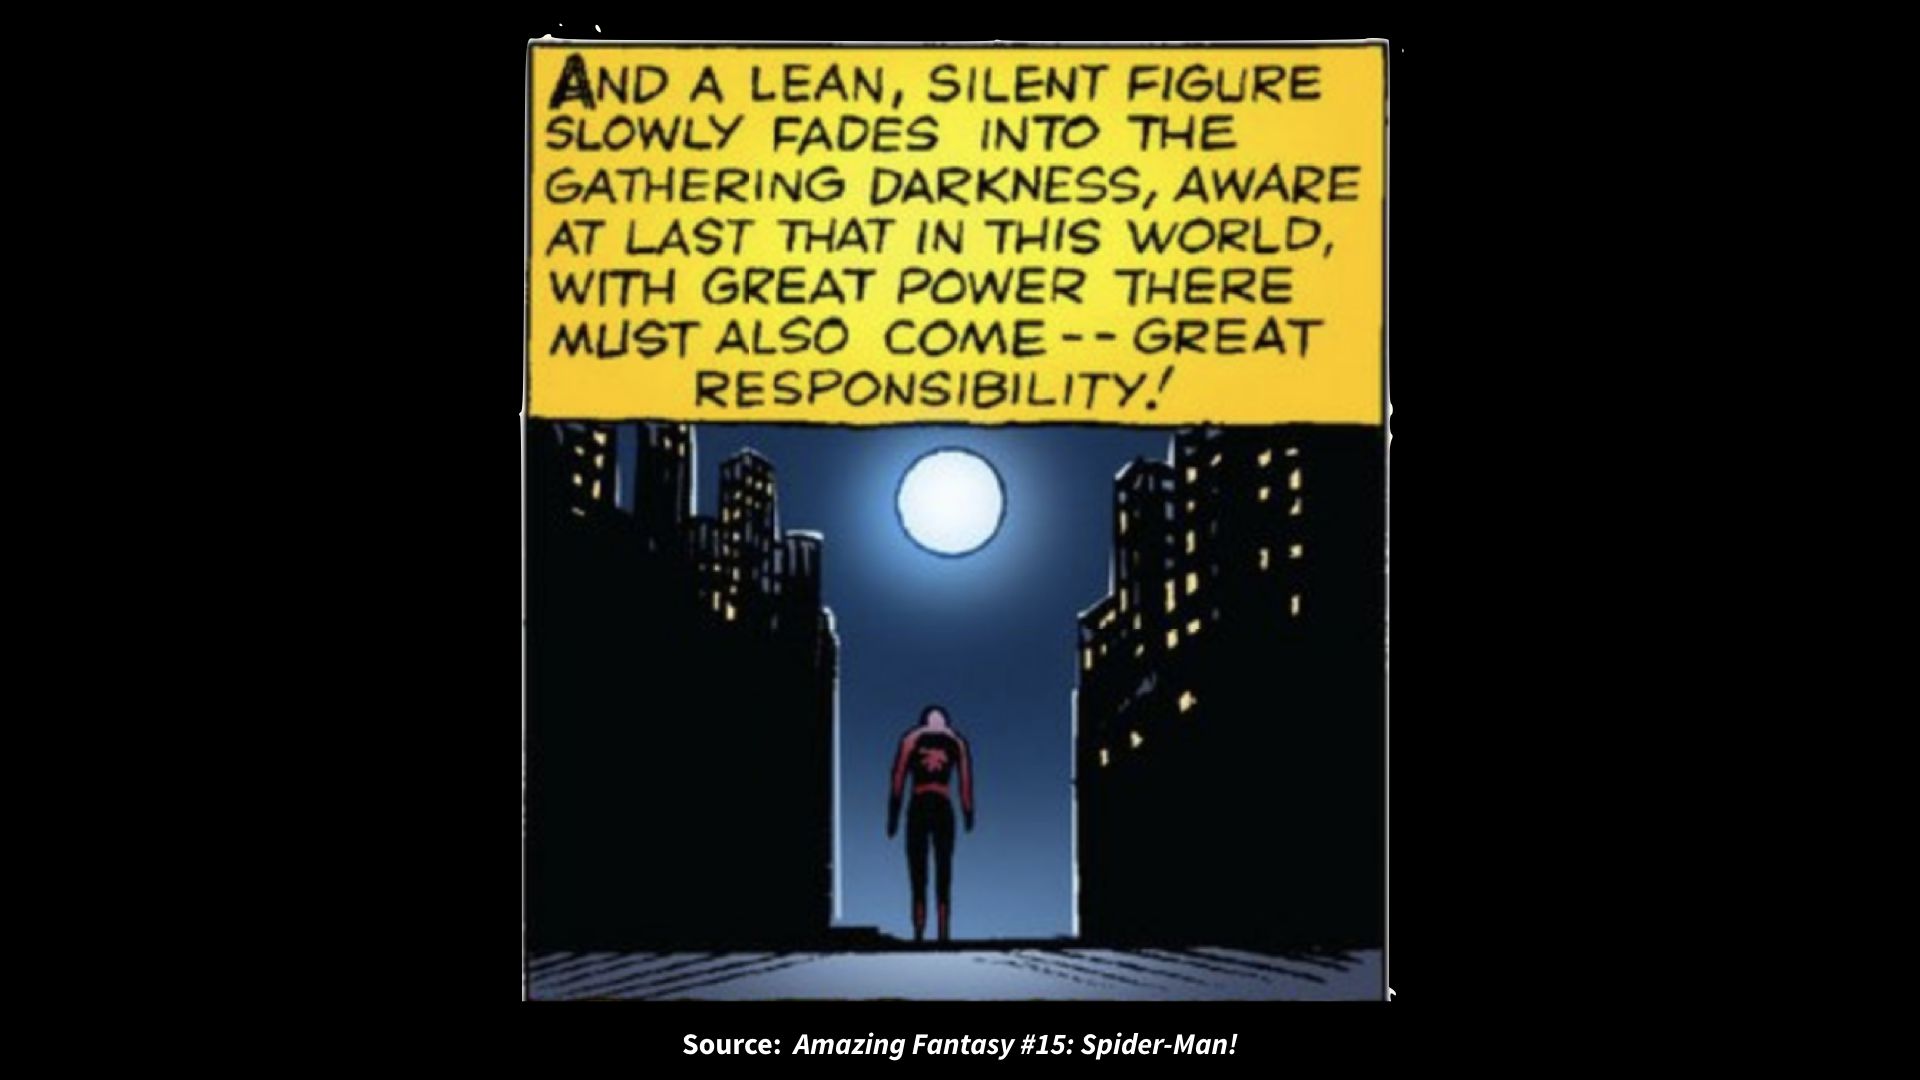 Comic panel from Amazing Fantasy #15: Spider-Man!. Text: And a lean, silent figure slow fades into the gathering darkness, aware at last that in this world, with great power there must also come great responsibility!